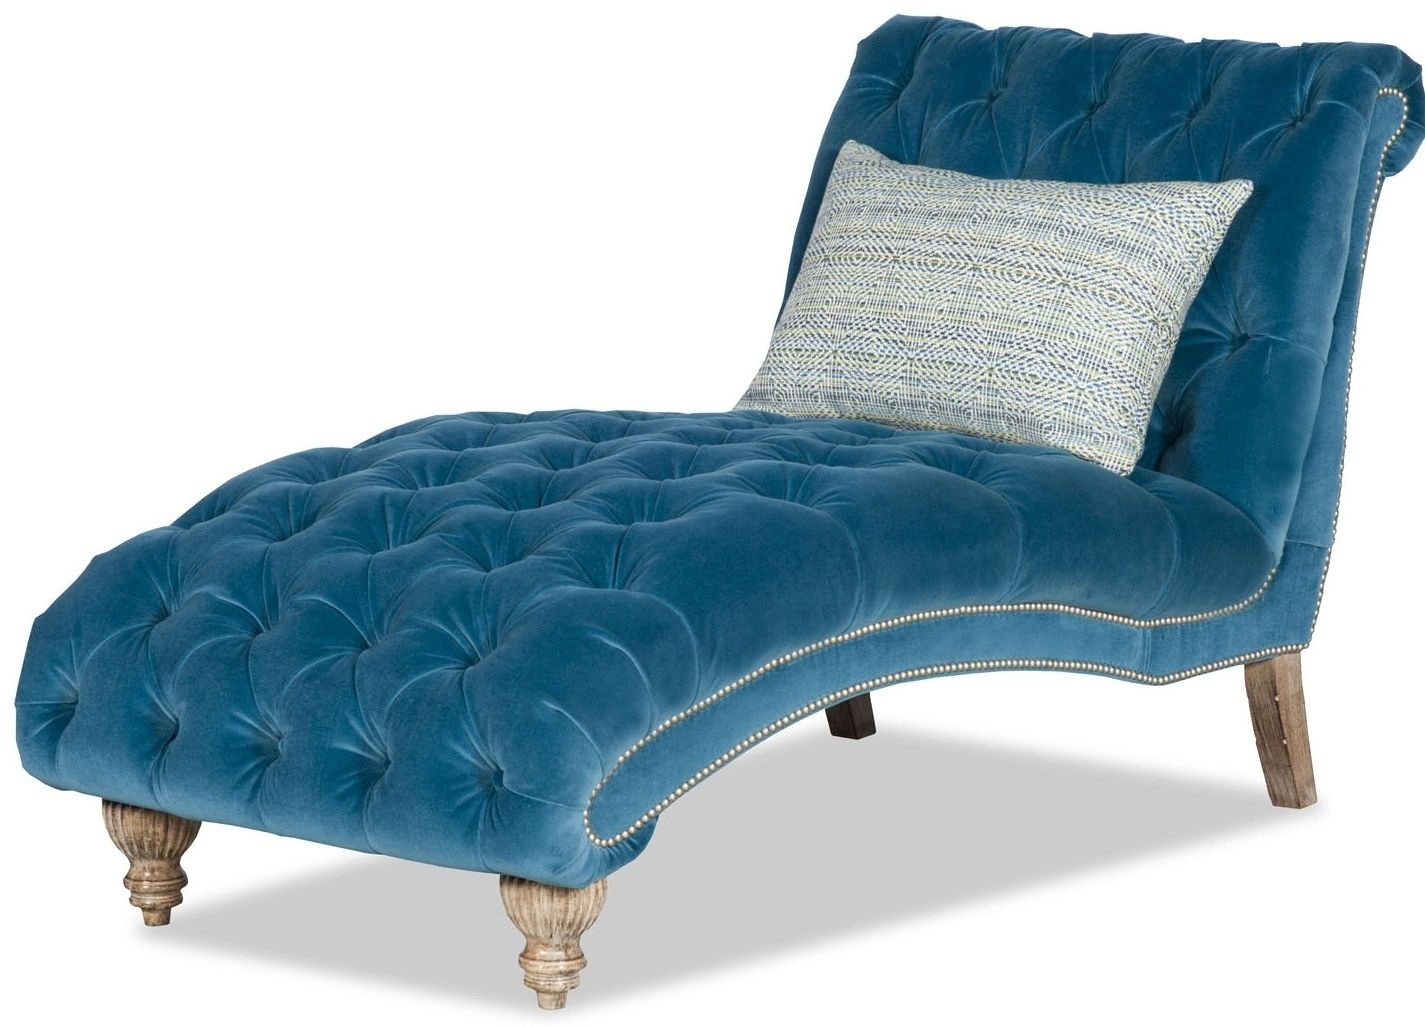 Peacock Blue Chaise Lounge Inside 2017 Chaise Benchs (View 11 of 15)